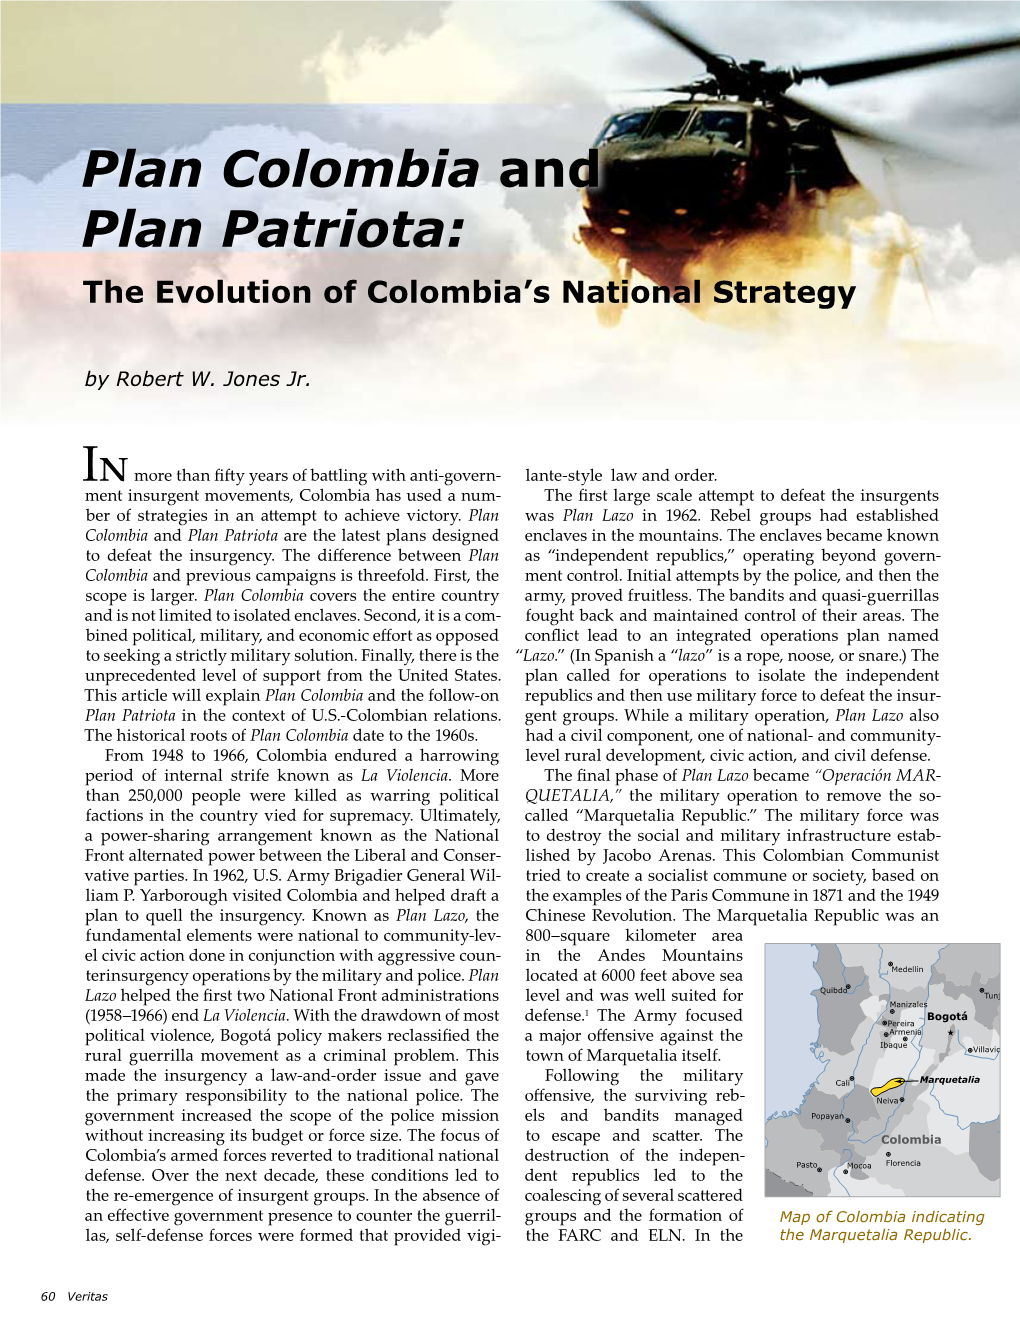 Plan Colombia and Plan Patriota: the Evolution of Colombia’S National Strategy